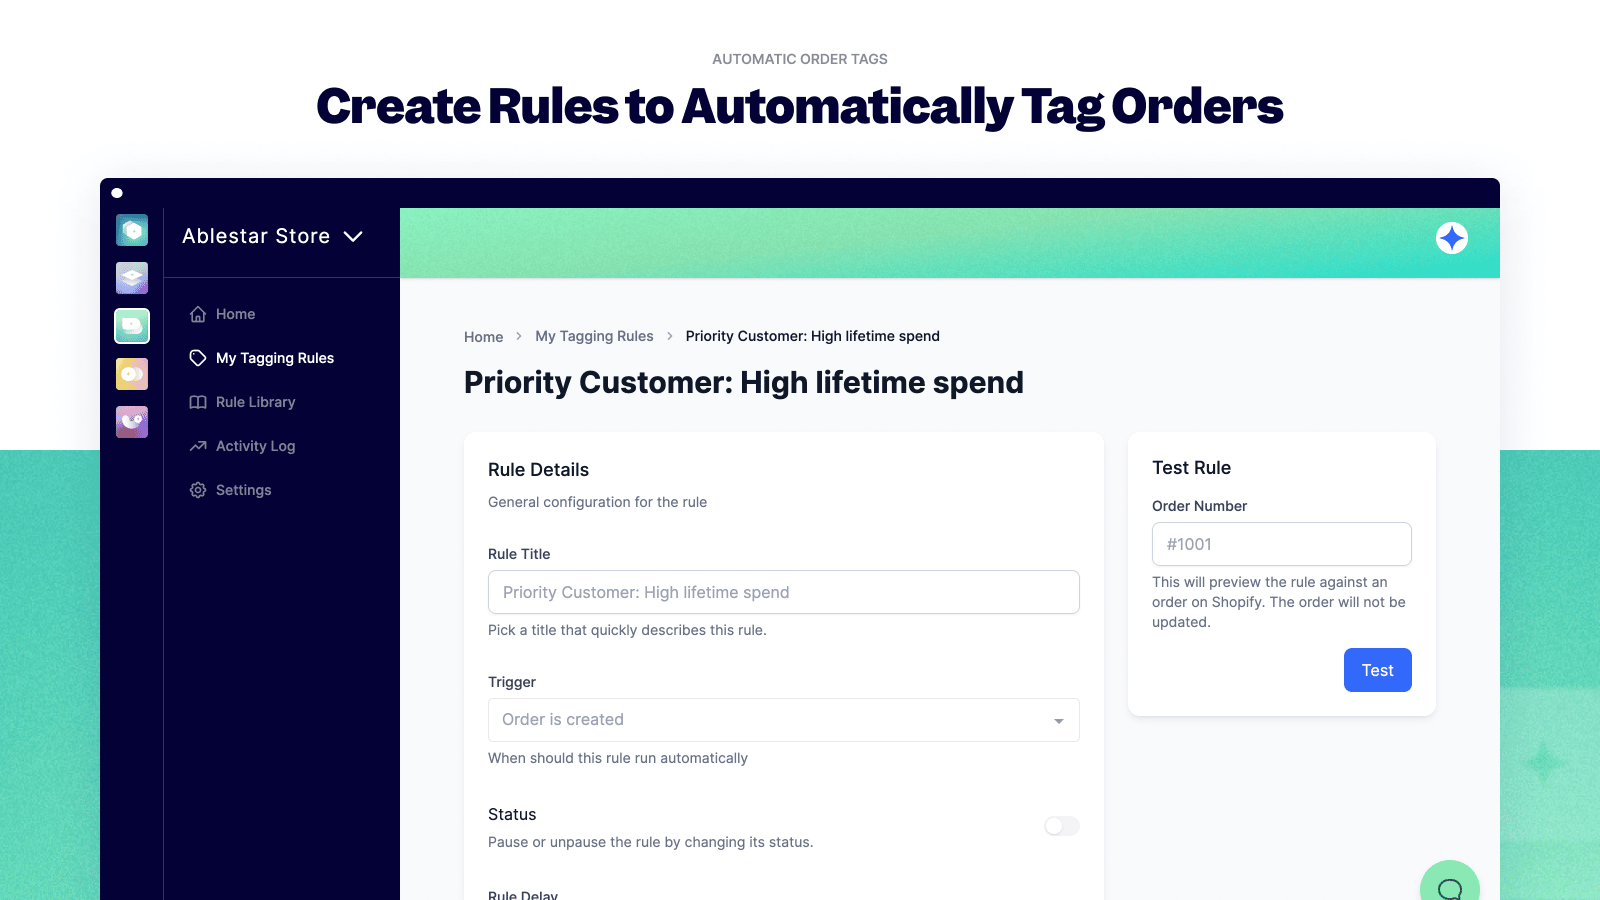 Ablestar Automatic Order Tags